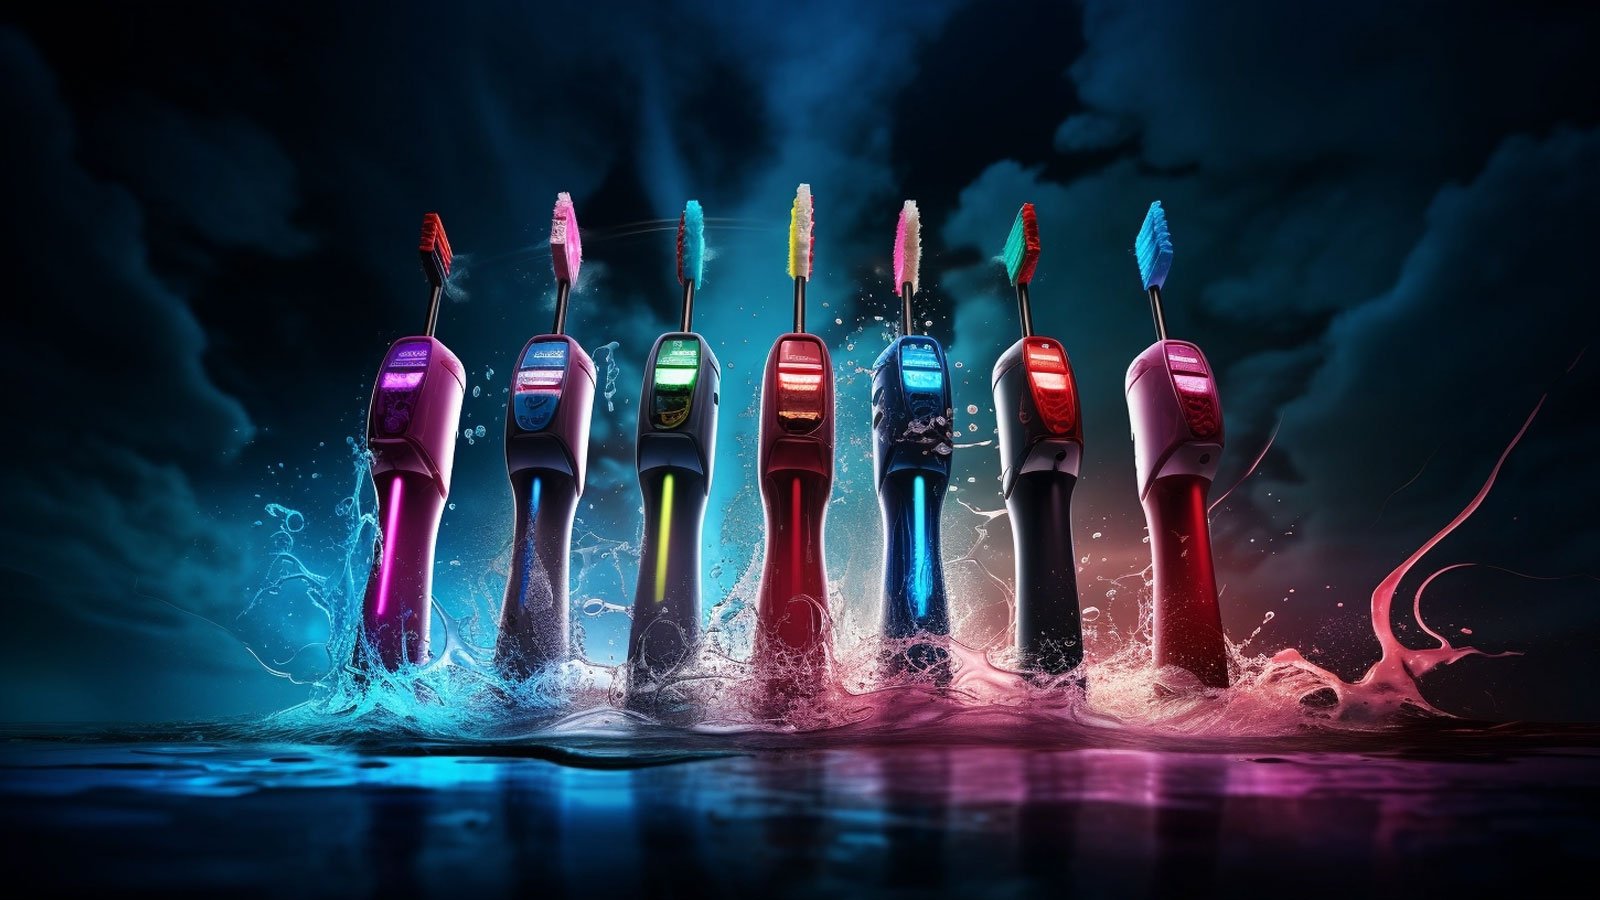 No, 3 million electric toothbrushes were not used in a DDoS attack